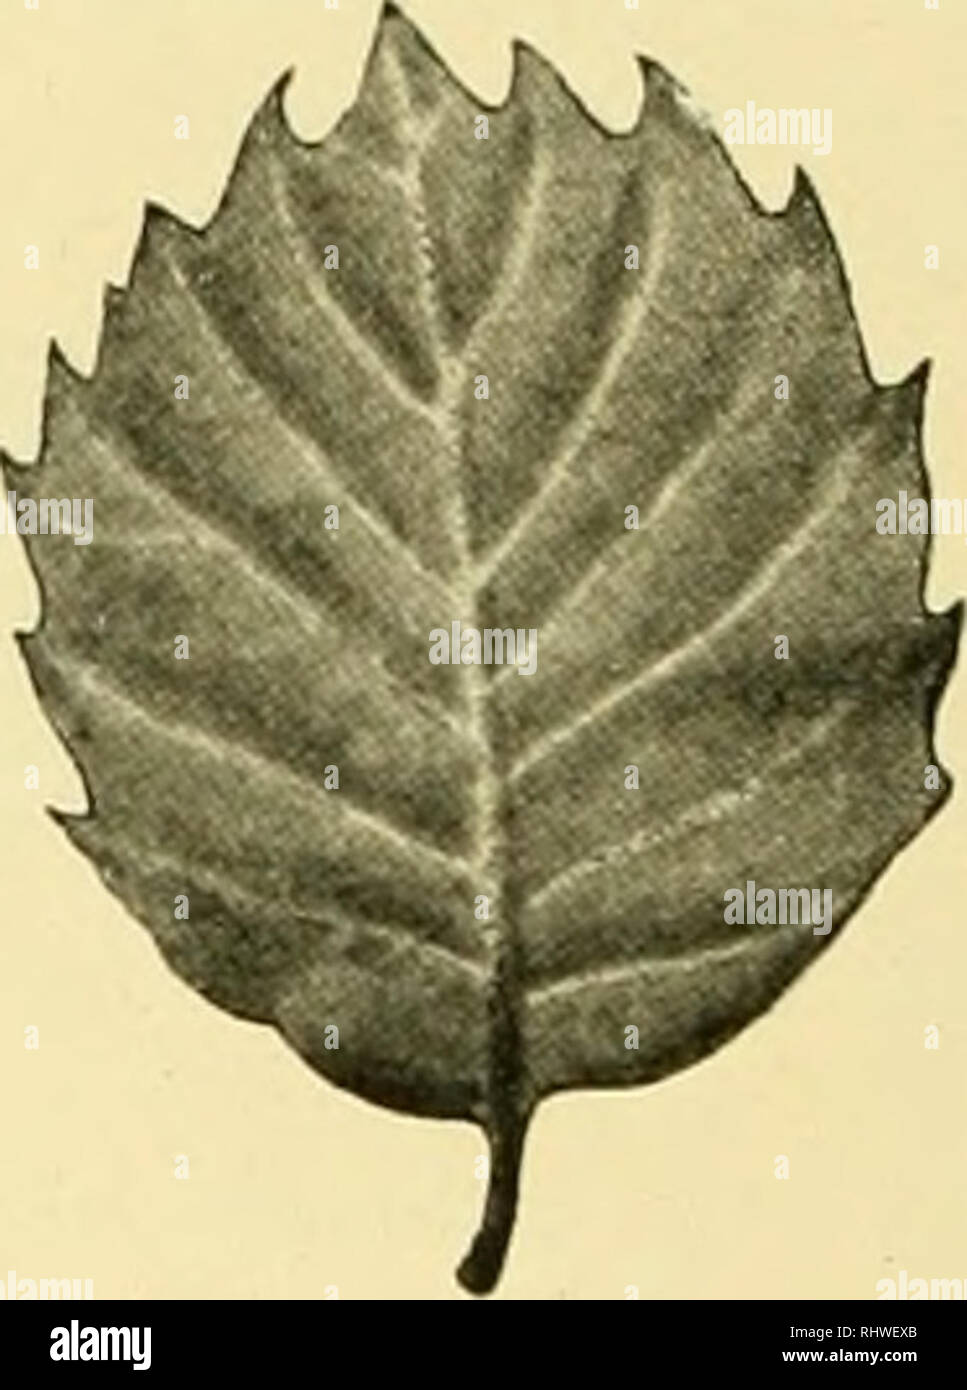 . Bergens Museums skrifter. Science. Fagaceae A. Br. Quercus lusitmiica Lam. Eucycl. Jlctli. I, 719 (1783); A. DC. Prudr. XVI, 2, 17; liui.ss. V. (iricut. IV. ll(i(i. A?u; subsp. Q. infectoria Oliv. Voy. I, 2.52, tab. 14 et 15 (1804); Poecb, Euum. plant. Cypr. 12: q. lusitan. suli.sp. oricntaiis A. DC. Prodr. XVI, 2, 18 (1861). Q. infectoria et Q.-inamis Kotsdiy, Cypern, 215—16 (1865). The characters distin- guishing- Kotscht's Q. infec- toria, Q. inermis and othei' re- lated &quot;species&quot;, of wliich he lia.s described a considerable number,—chiefly the shape and pubescense of the leave Stock Photo